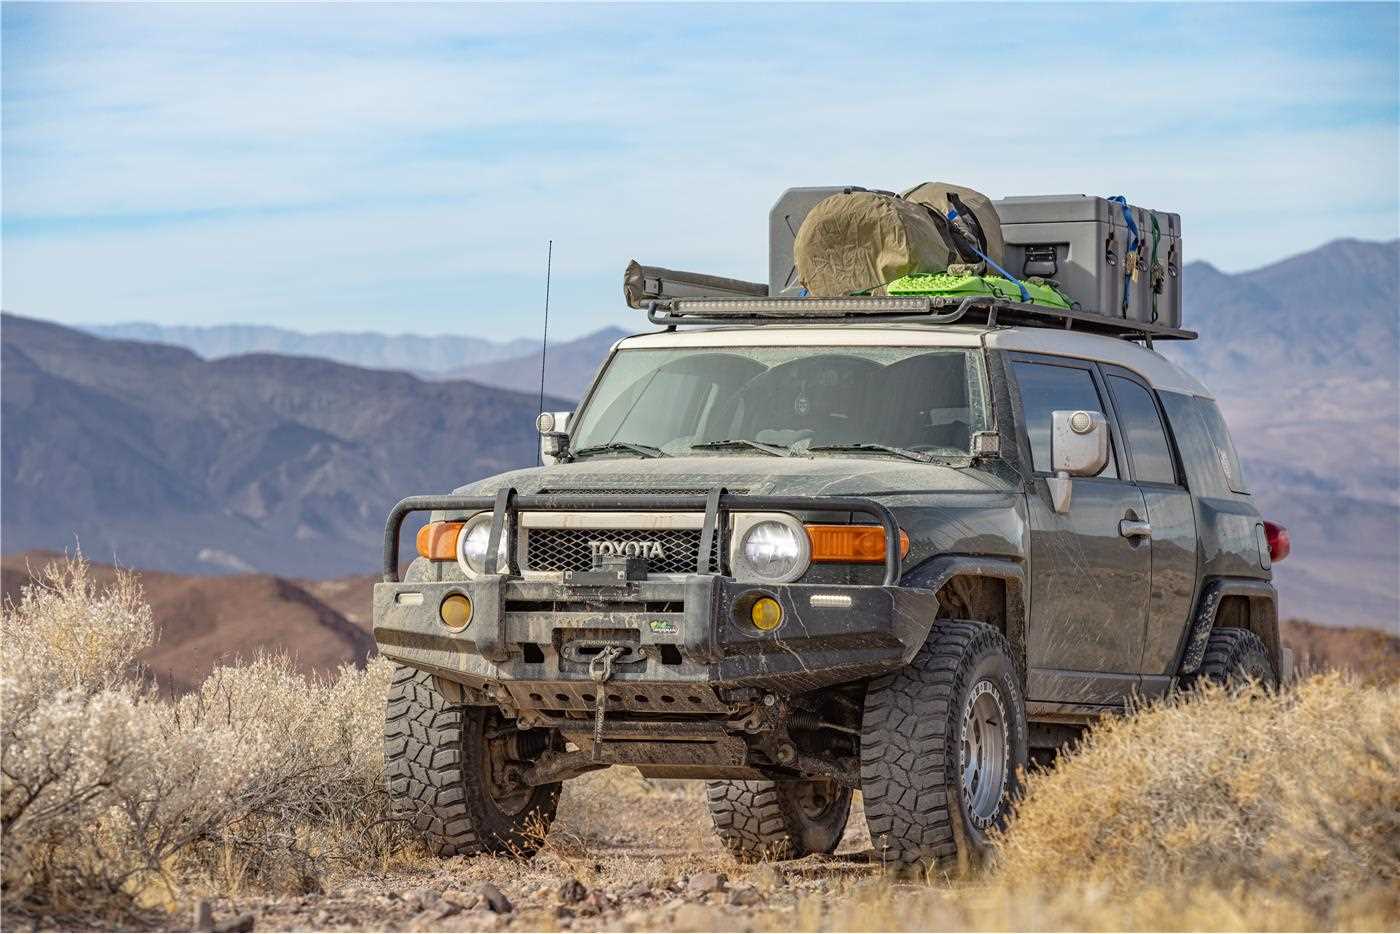 Navigate Colorado in a Rugged Ironman 4x4 Equipped Vehicle